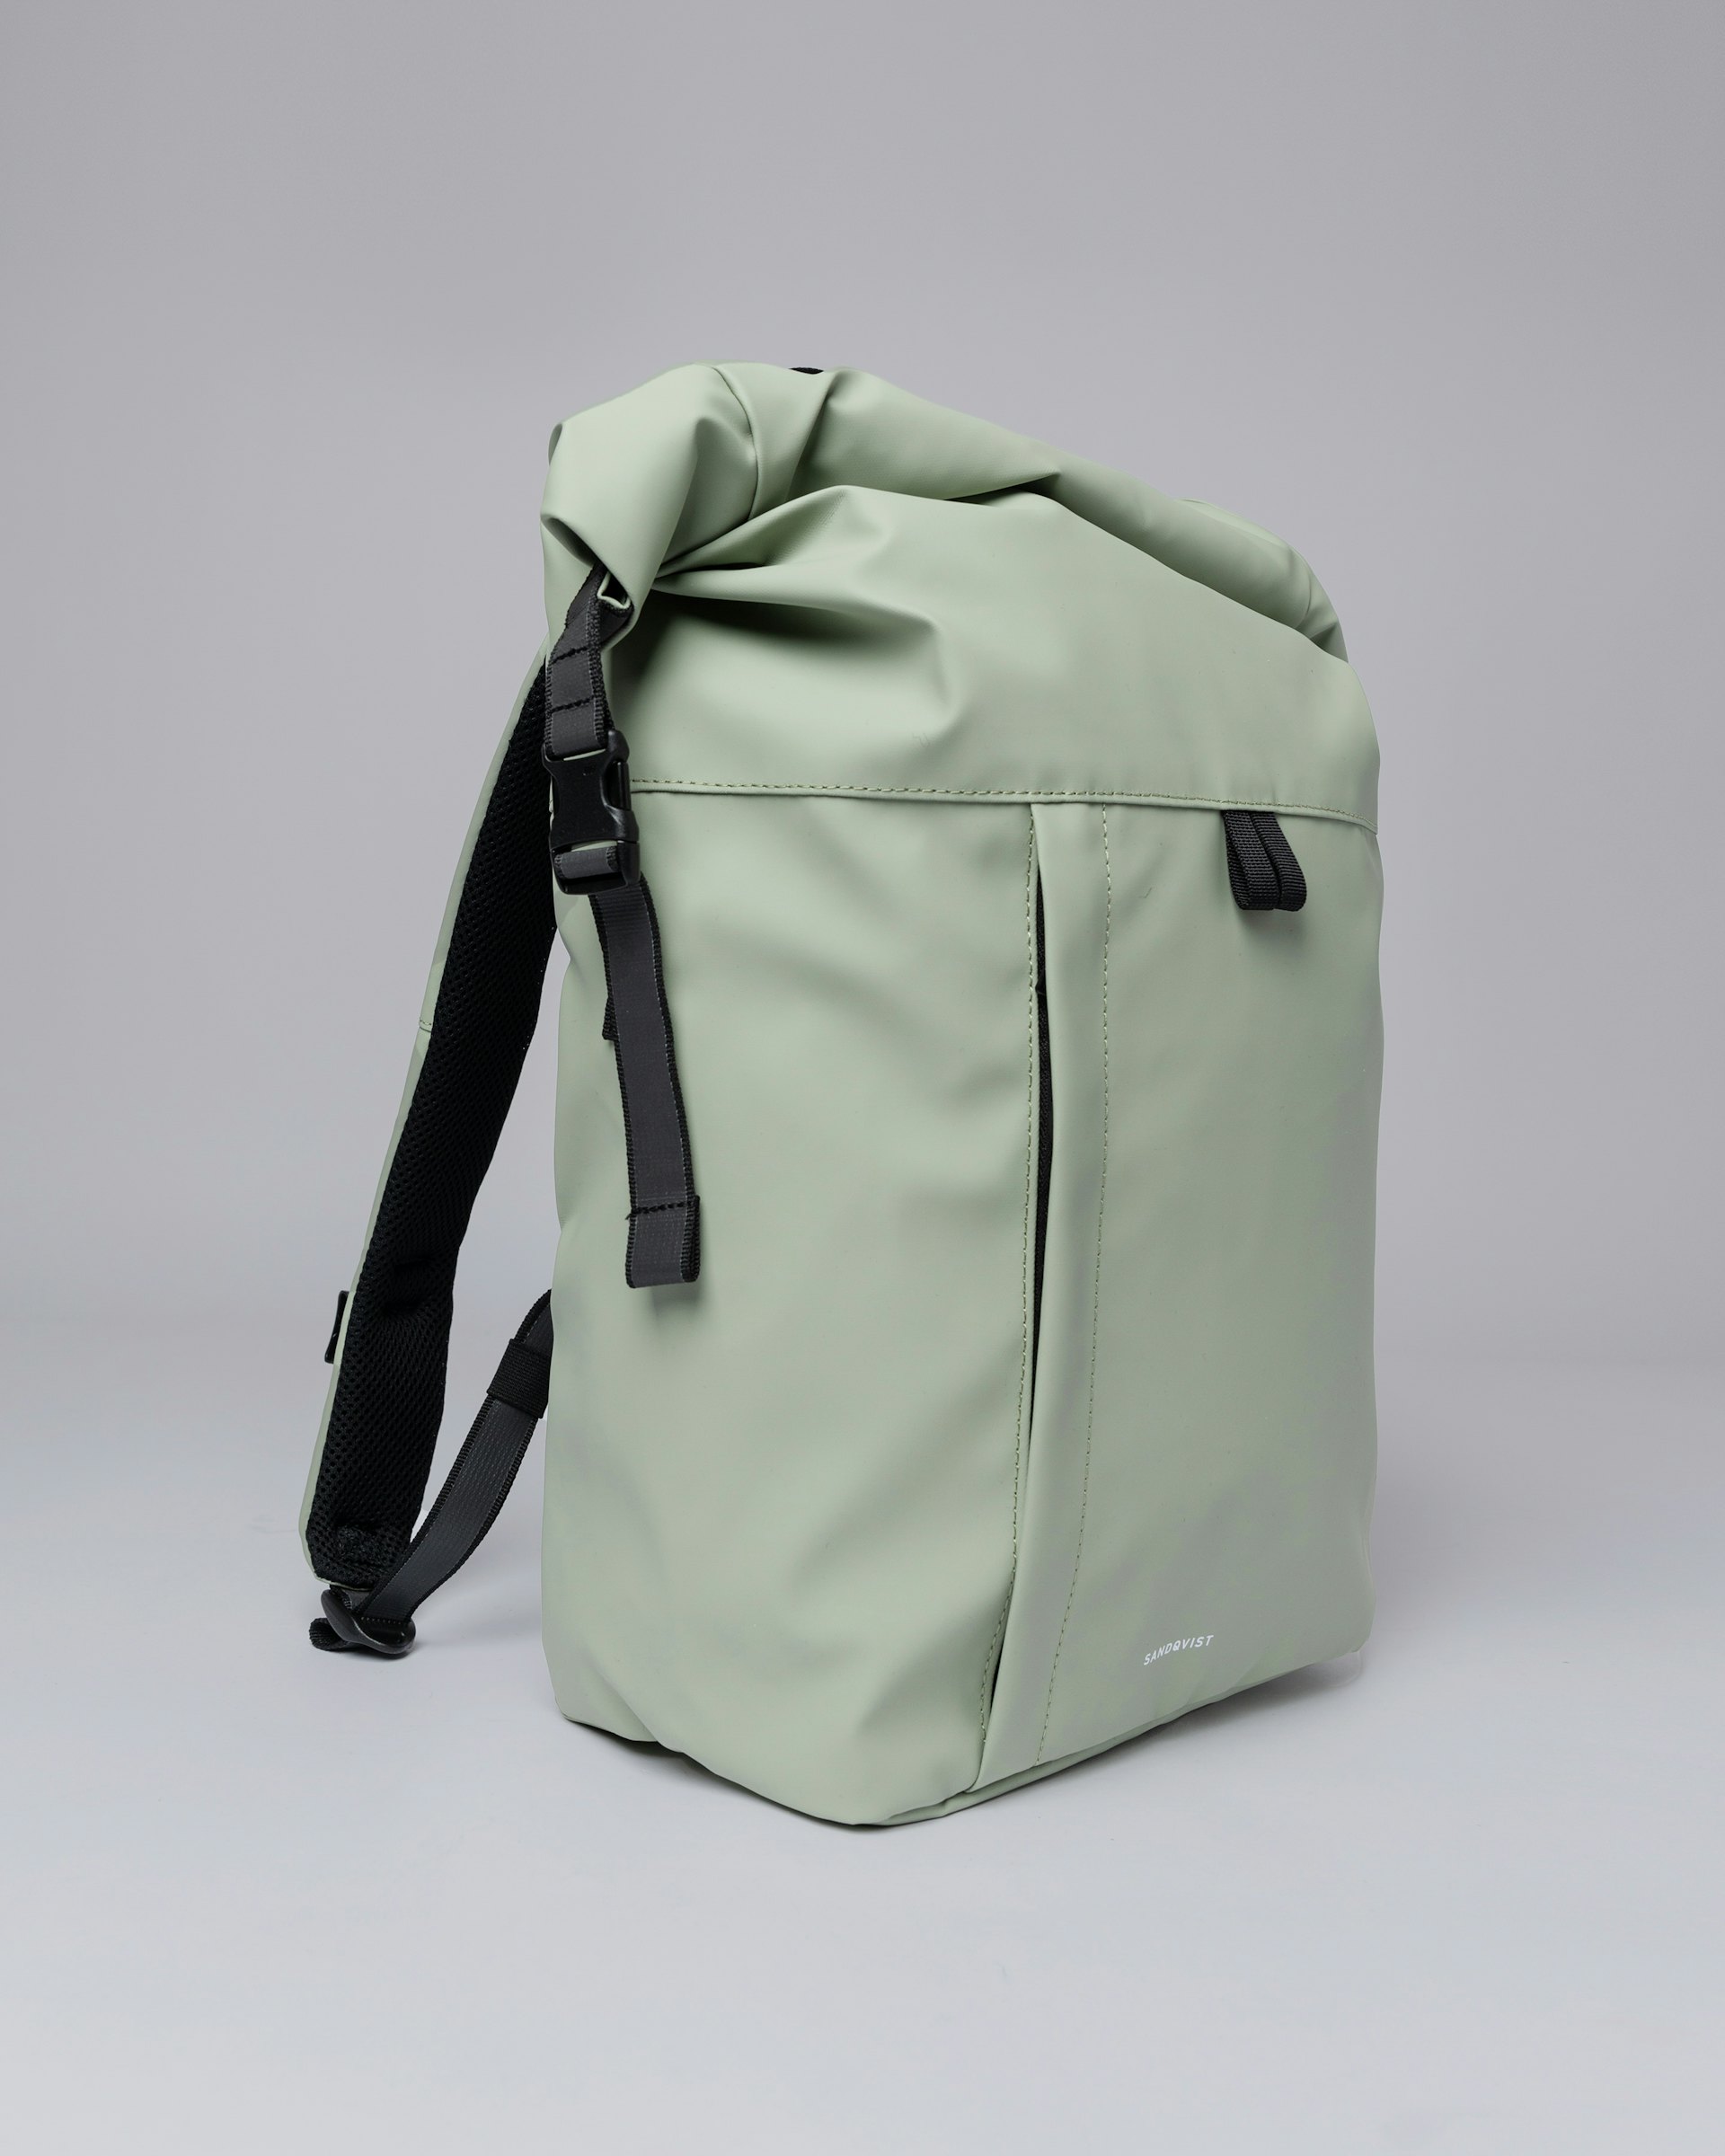 Konrad belongs to the category Backpacks and is in color dew green (3 of 5)